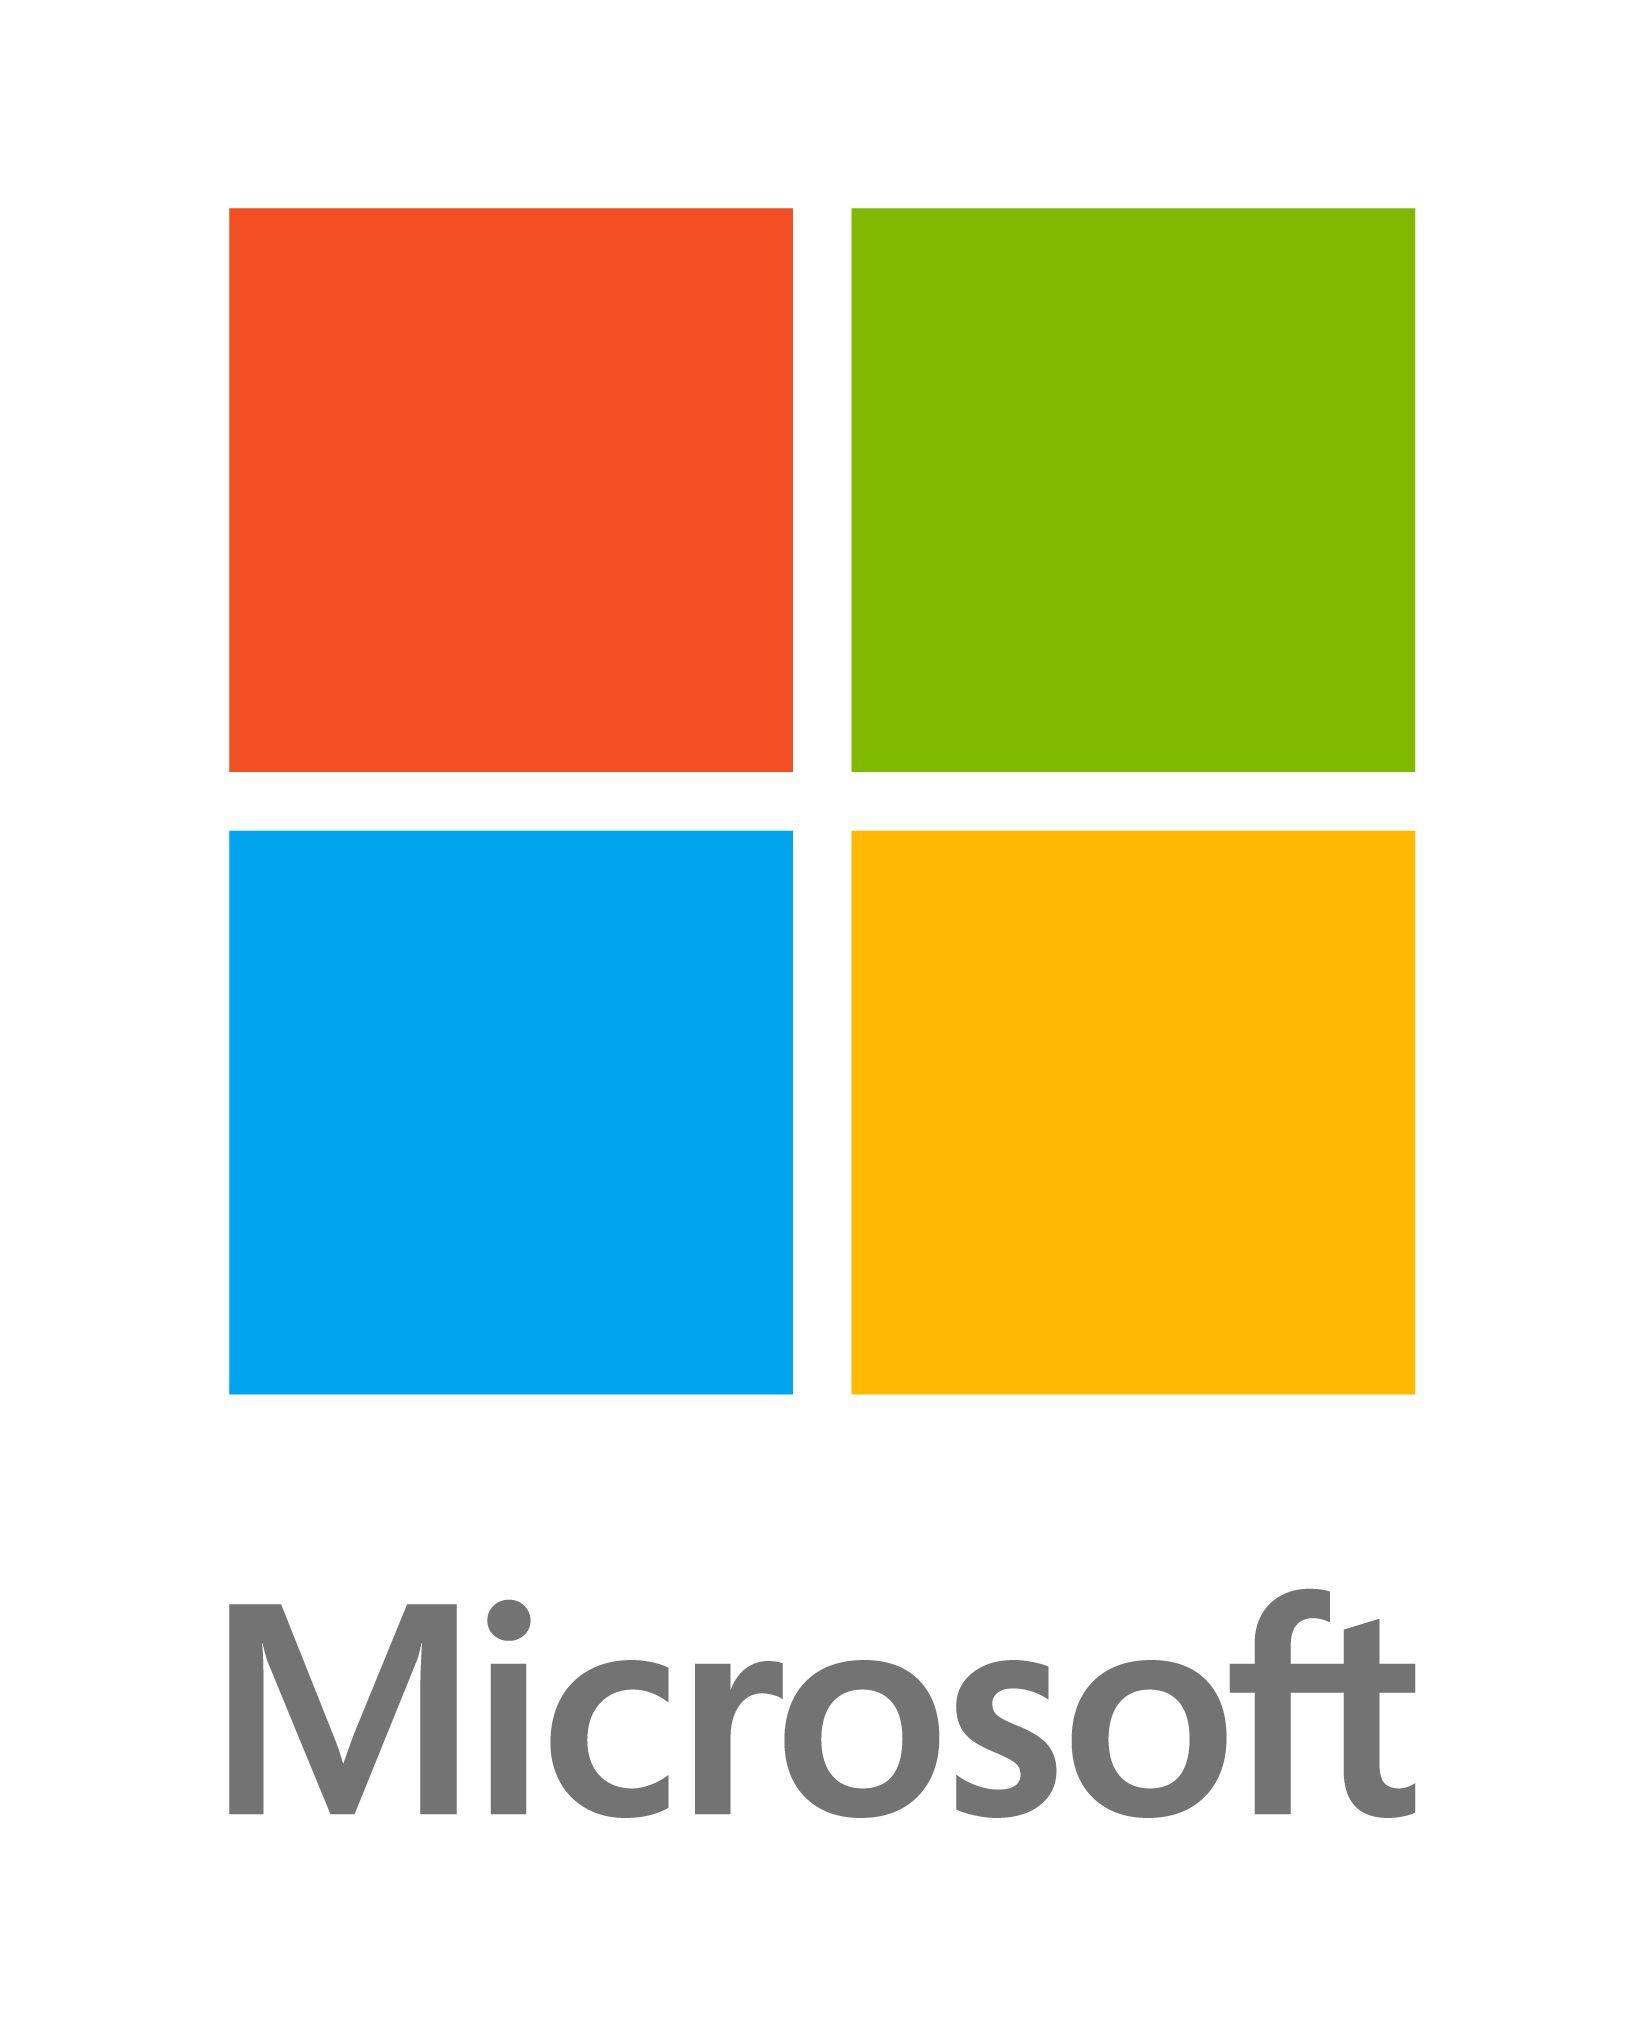 American Personal Computer Company Logo - Microsoft Corporation is an American multinational technology ...